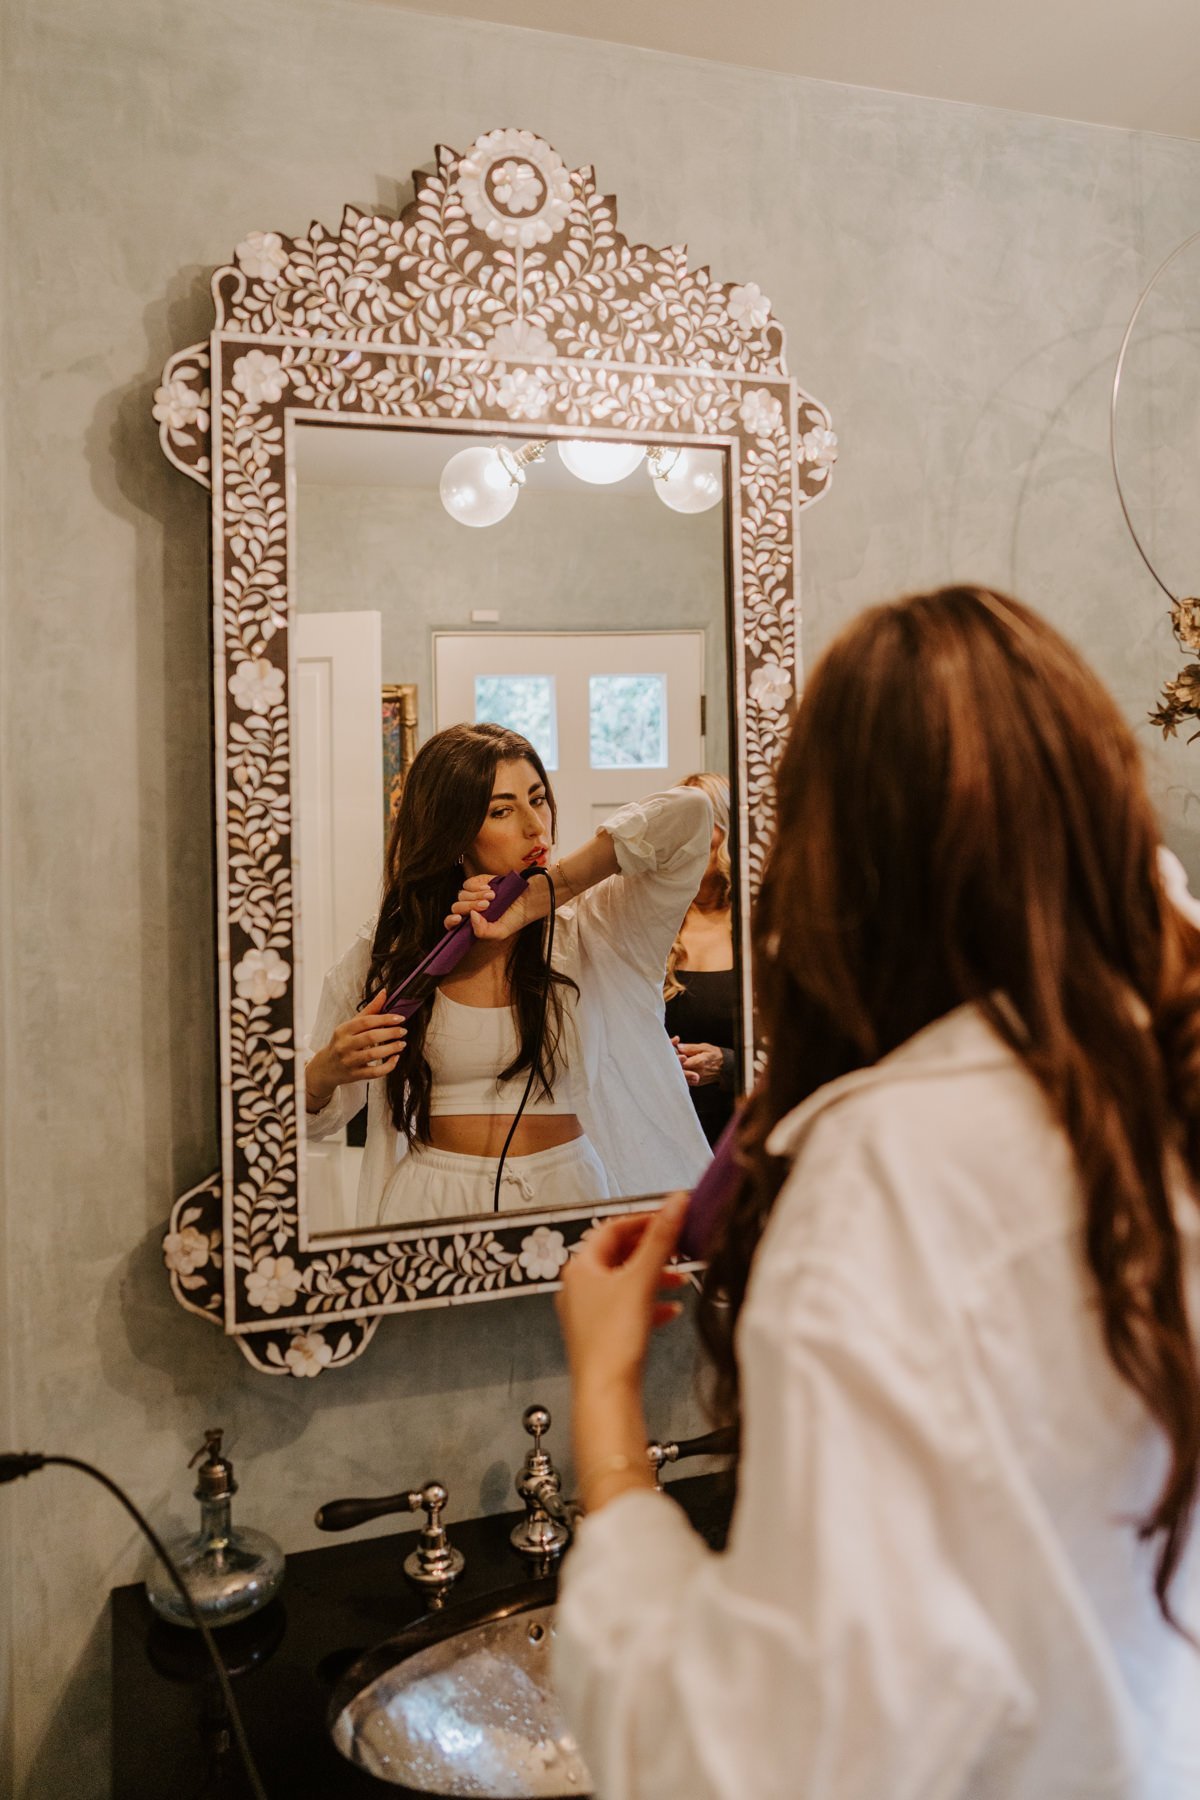 Bride getting ready, photo by Tida Svy, Los Angeles Wedding Photographer